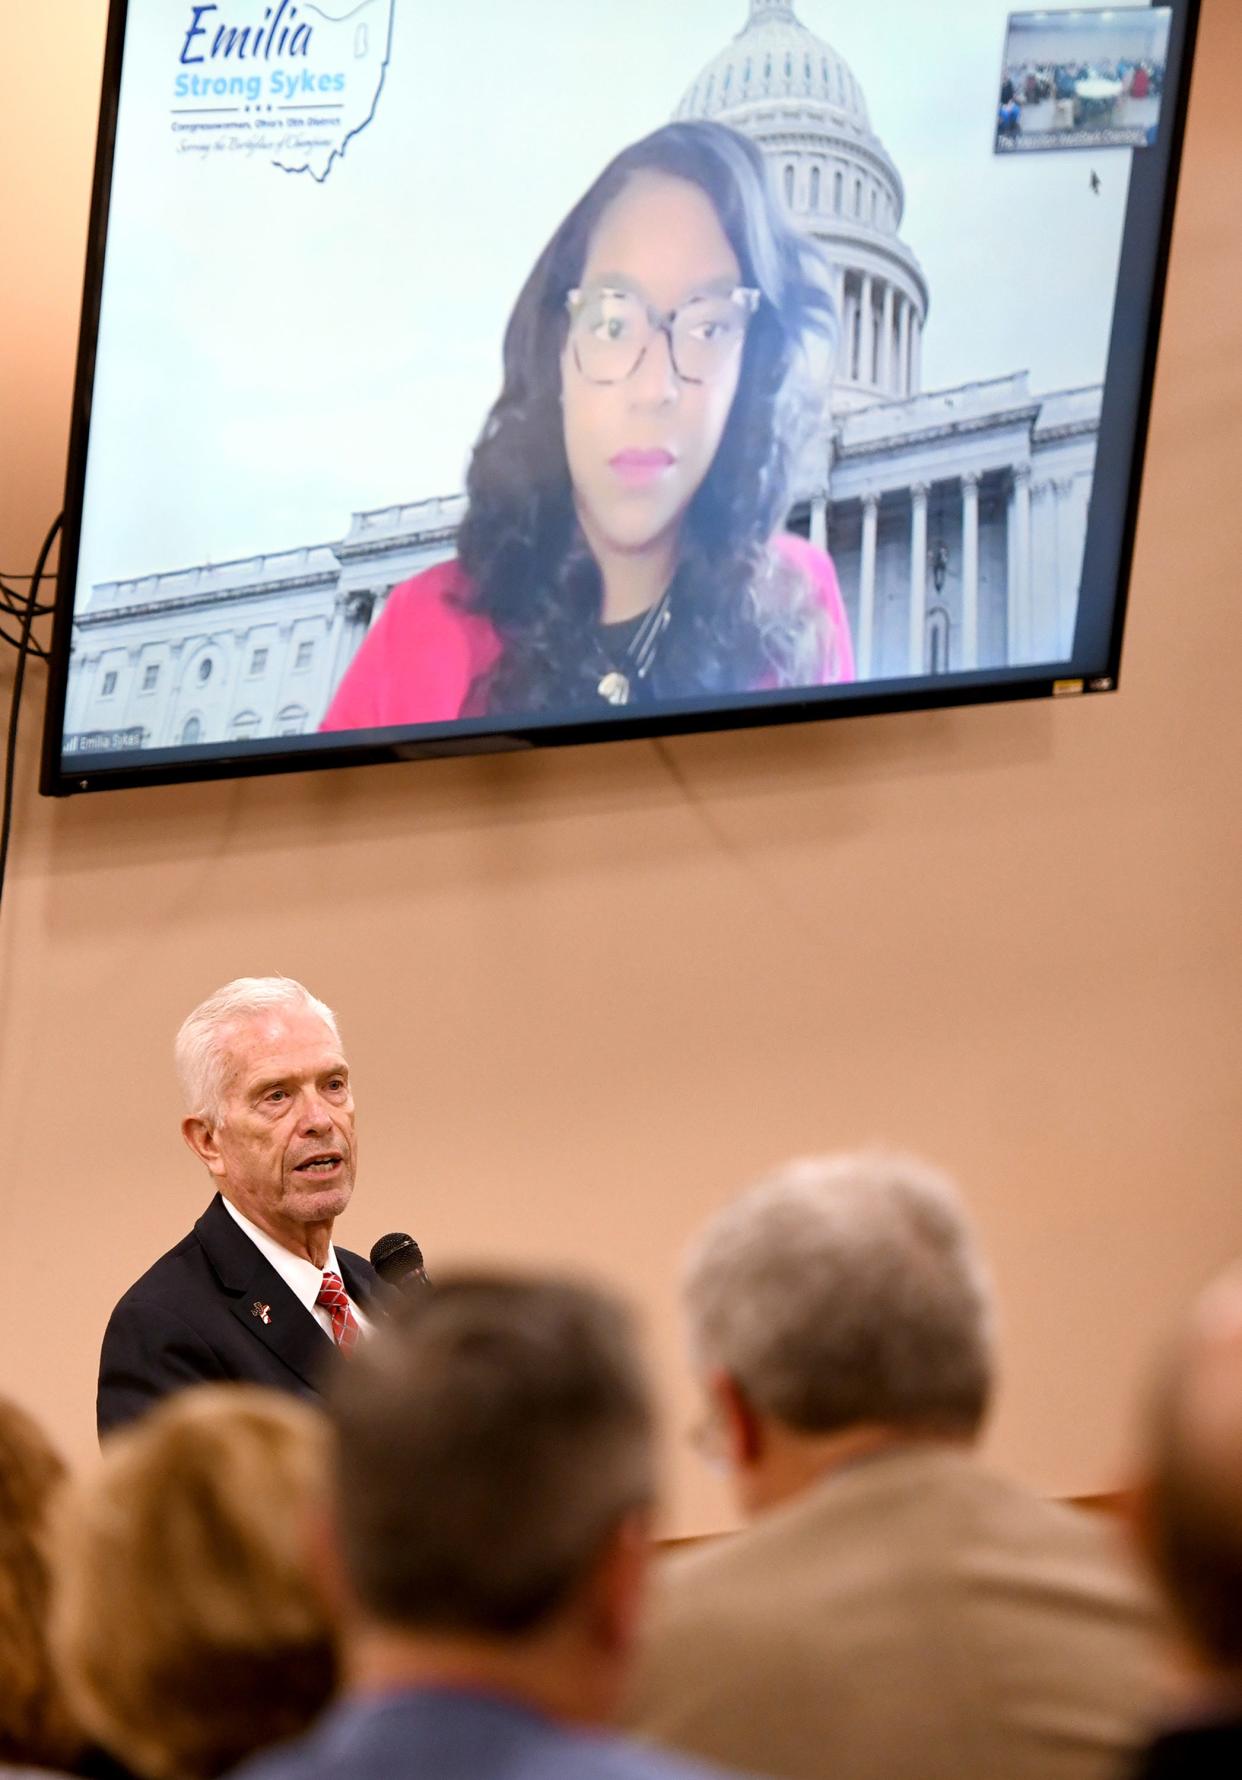 U.S. Rep. BIll Johnson, R-Marietta, and U.S. Rep. Emilia Sykes, D-Akron, answer legislative questions Friday morning during the Massillon WestStark Chamber of Commerce annual breakfast. About 90 people attended the event at Fraternal Order of Eagles 190.